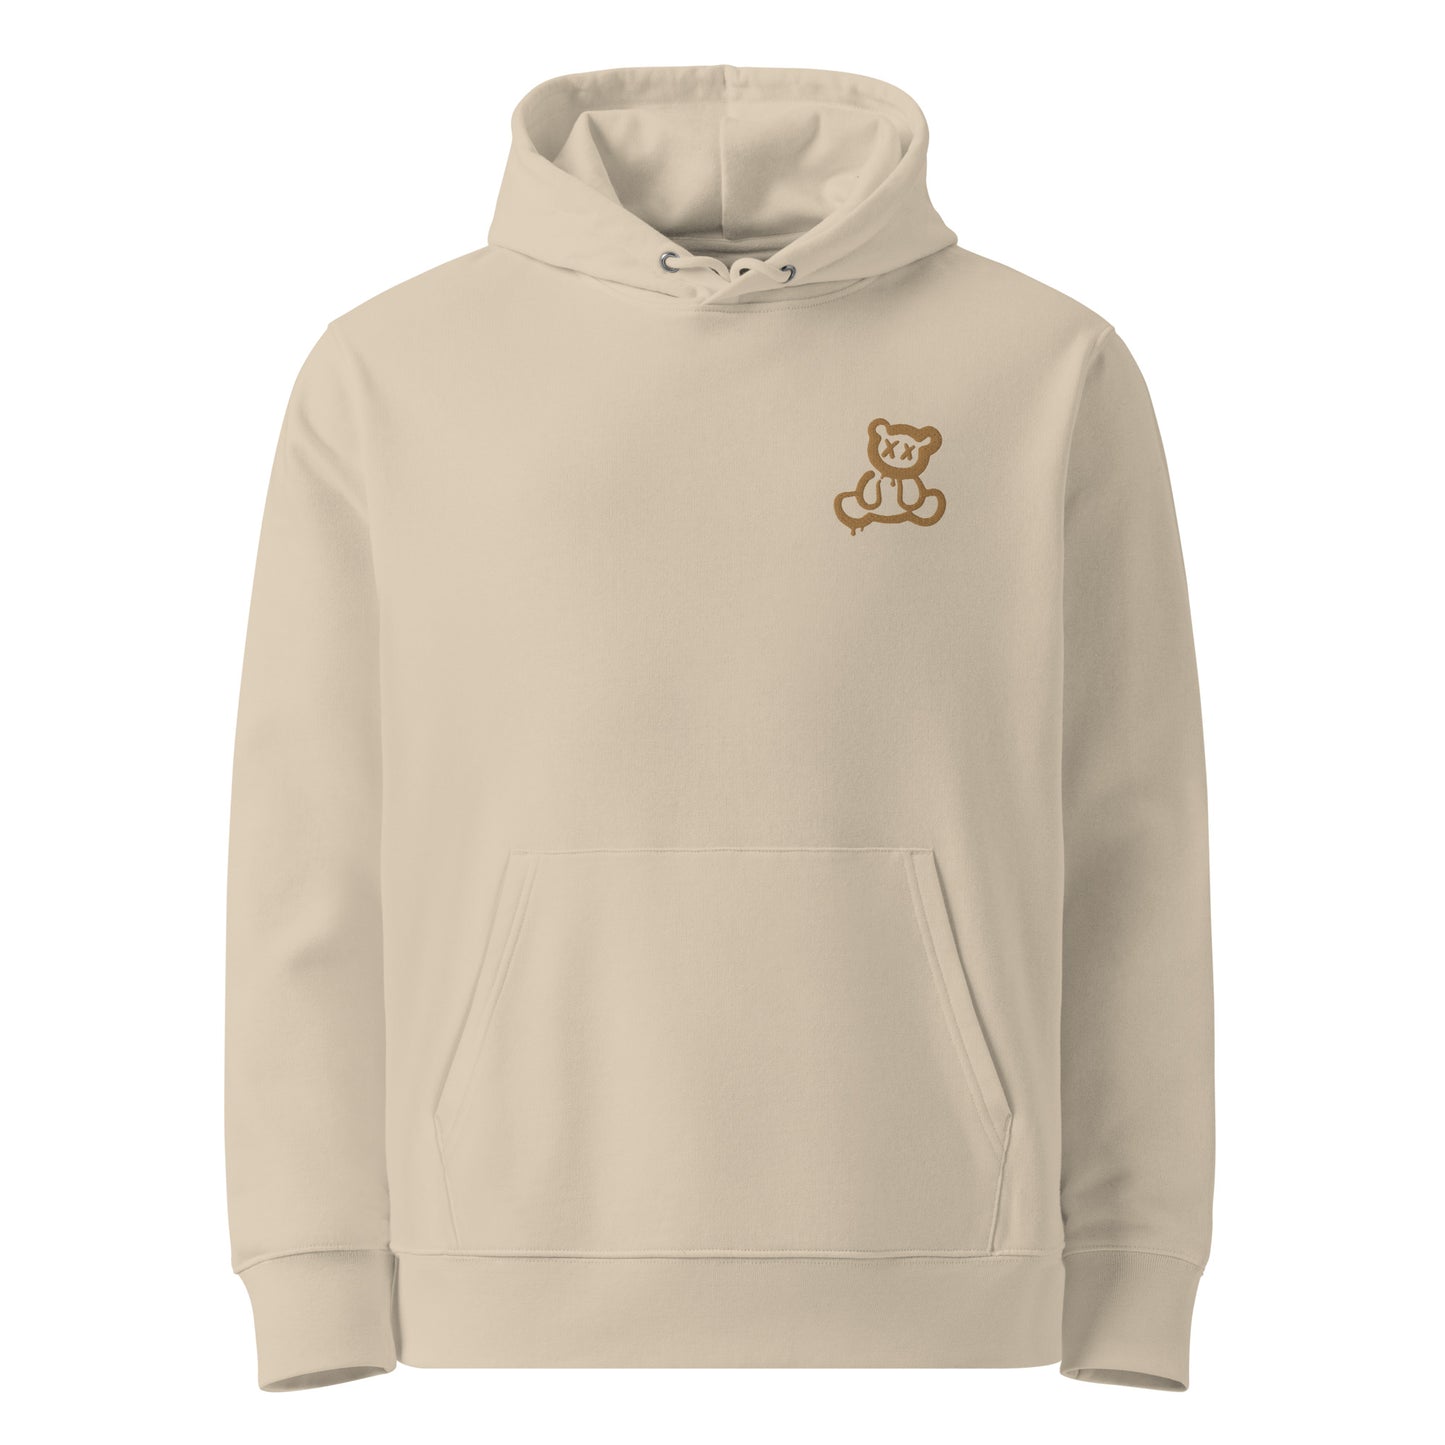 Unisex eco-friendly desert dust hoodie featuring on the upper left chest; a subtle embroidered graffiti bear in gold, adding a touch of lgbtq to your outfit. sizes: small, medium, large, extra large, double extra large.